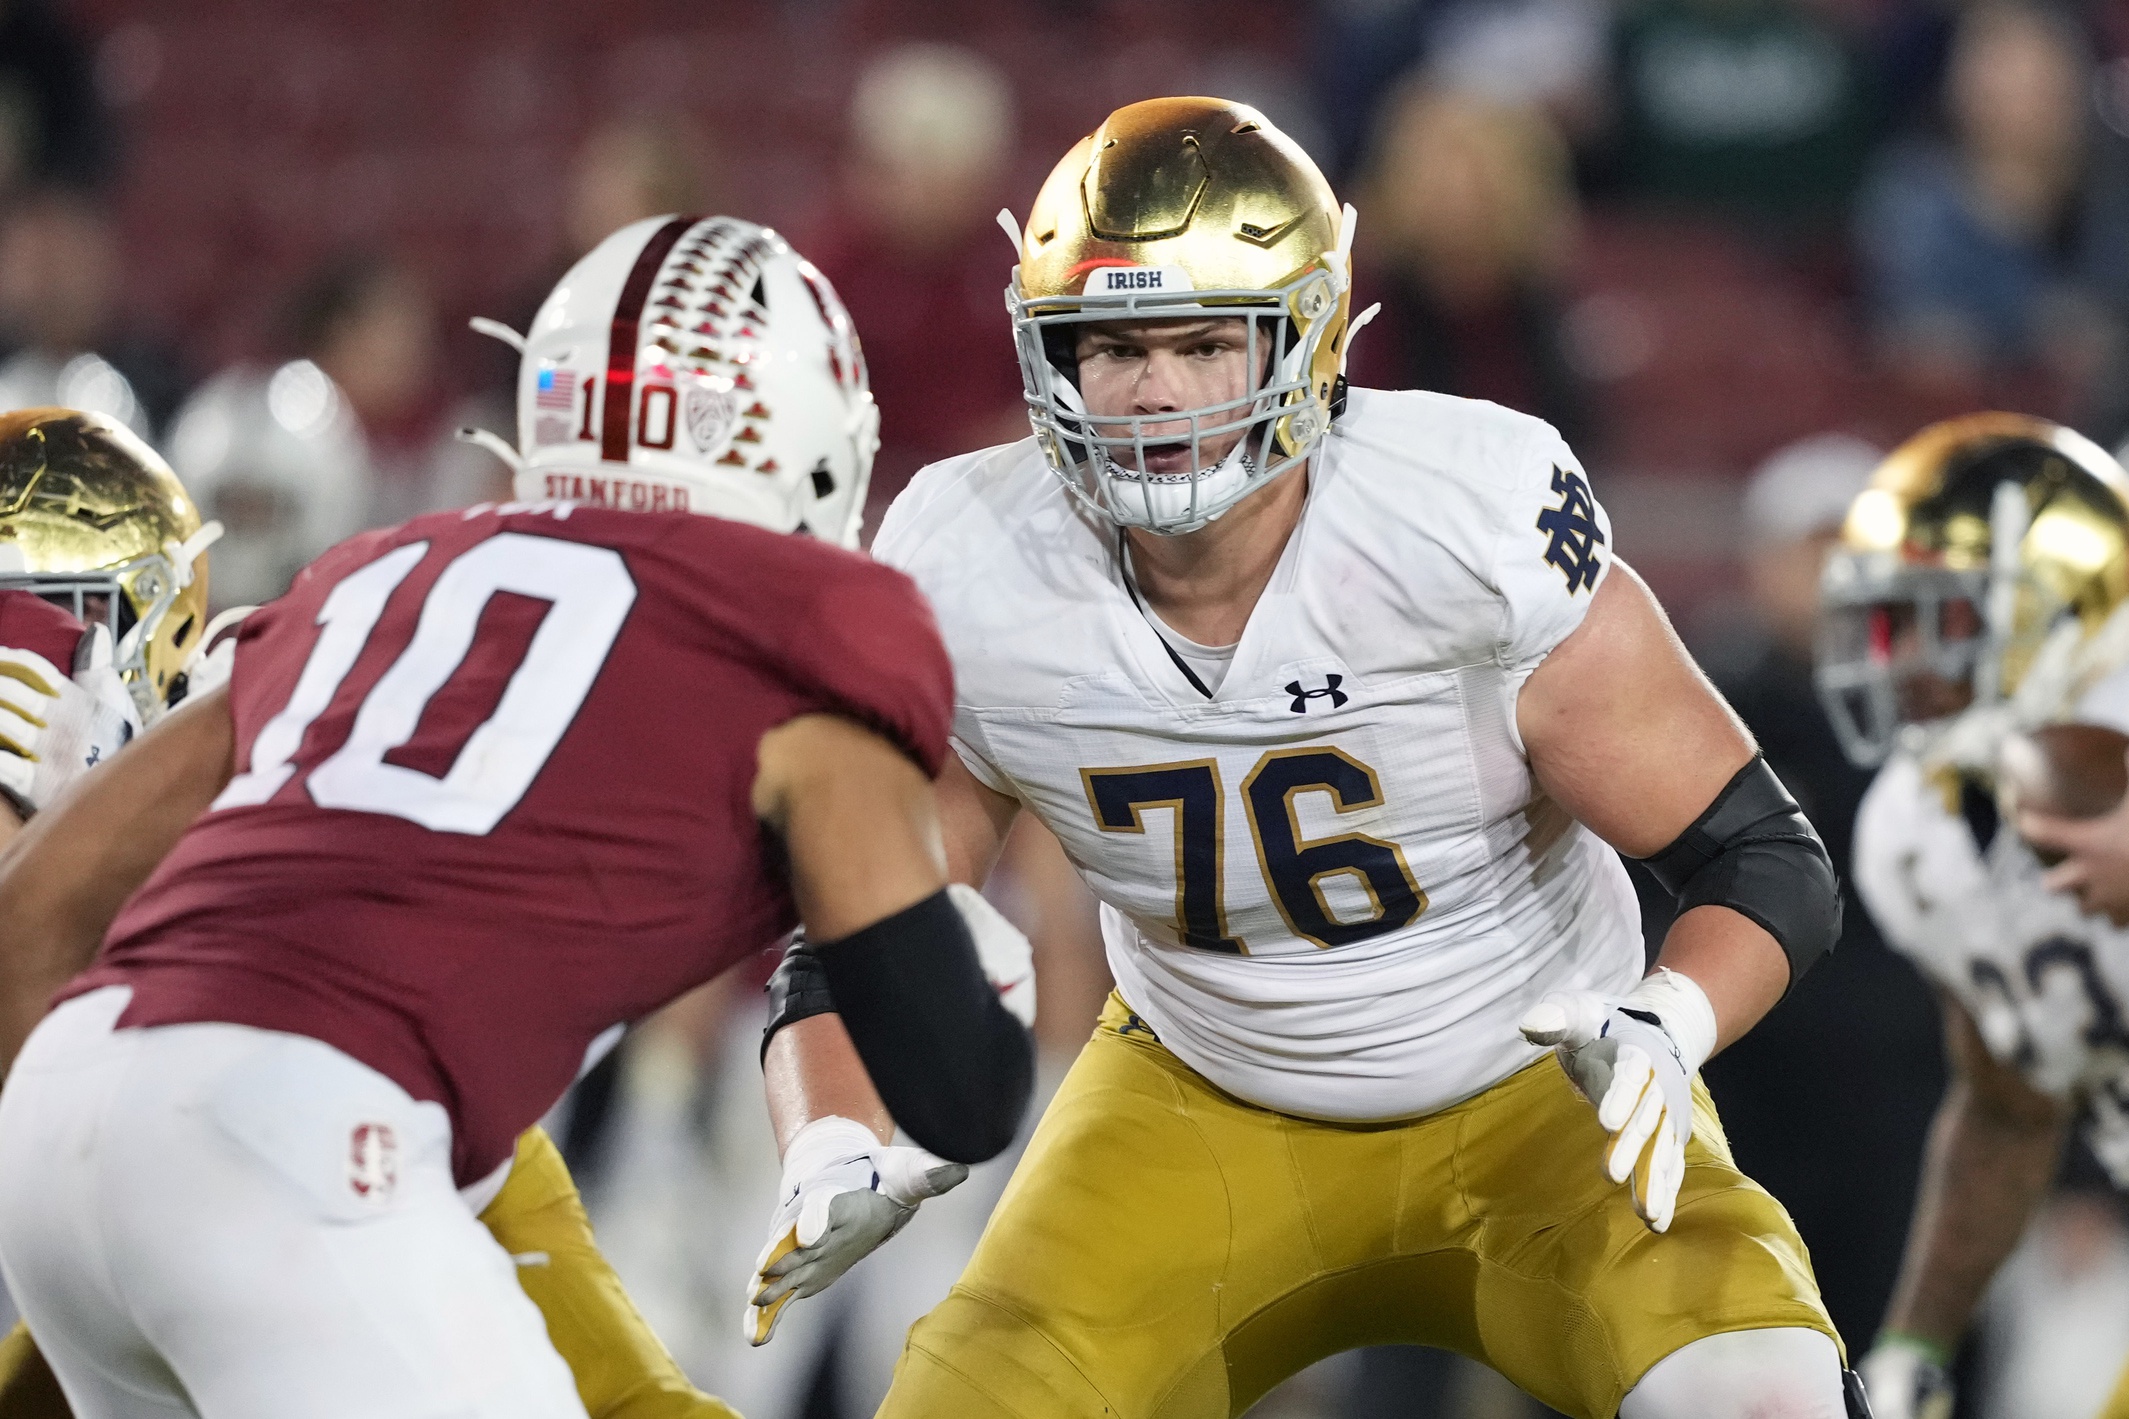 Notre Dame’s Joe Alt Drafted by the Chargers